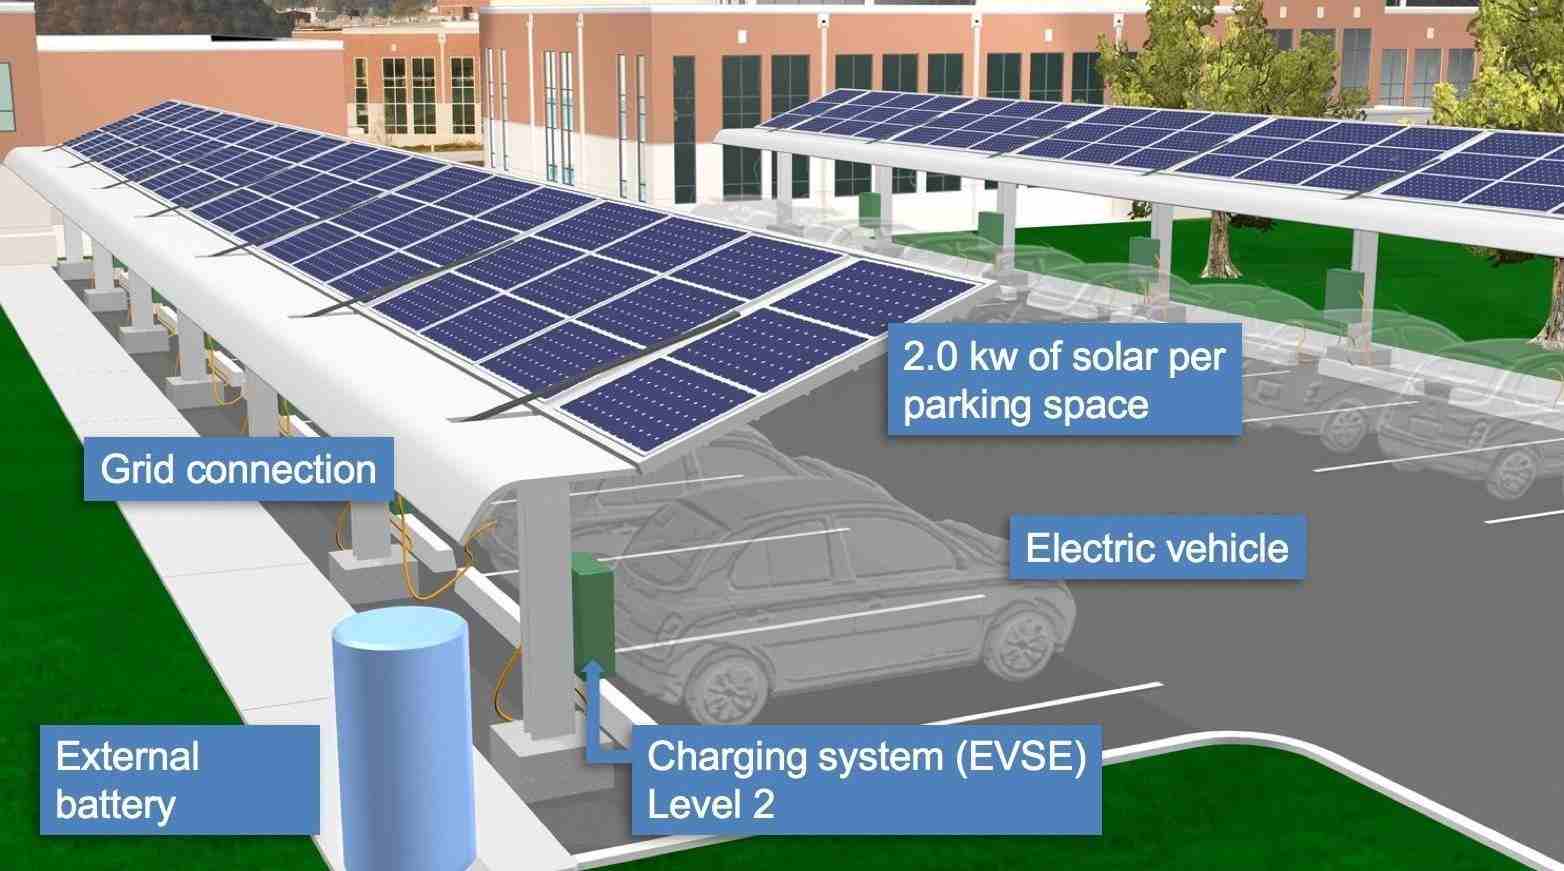 The Integration of Two Renewable Technologies: An EV and The PV